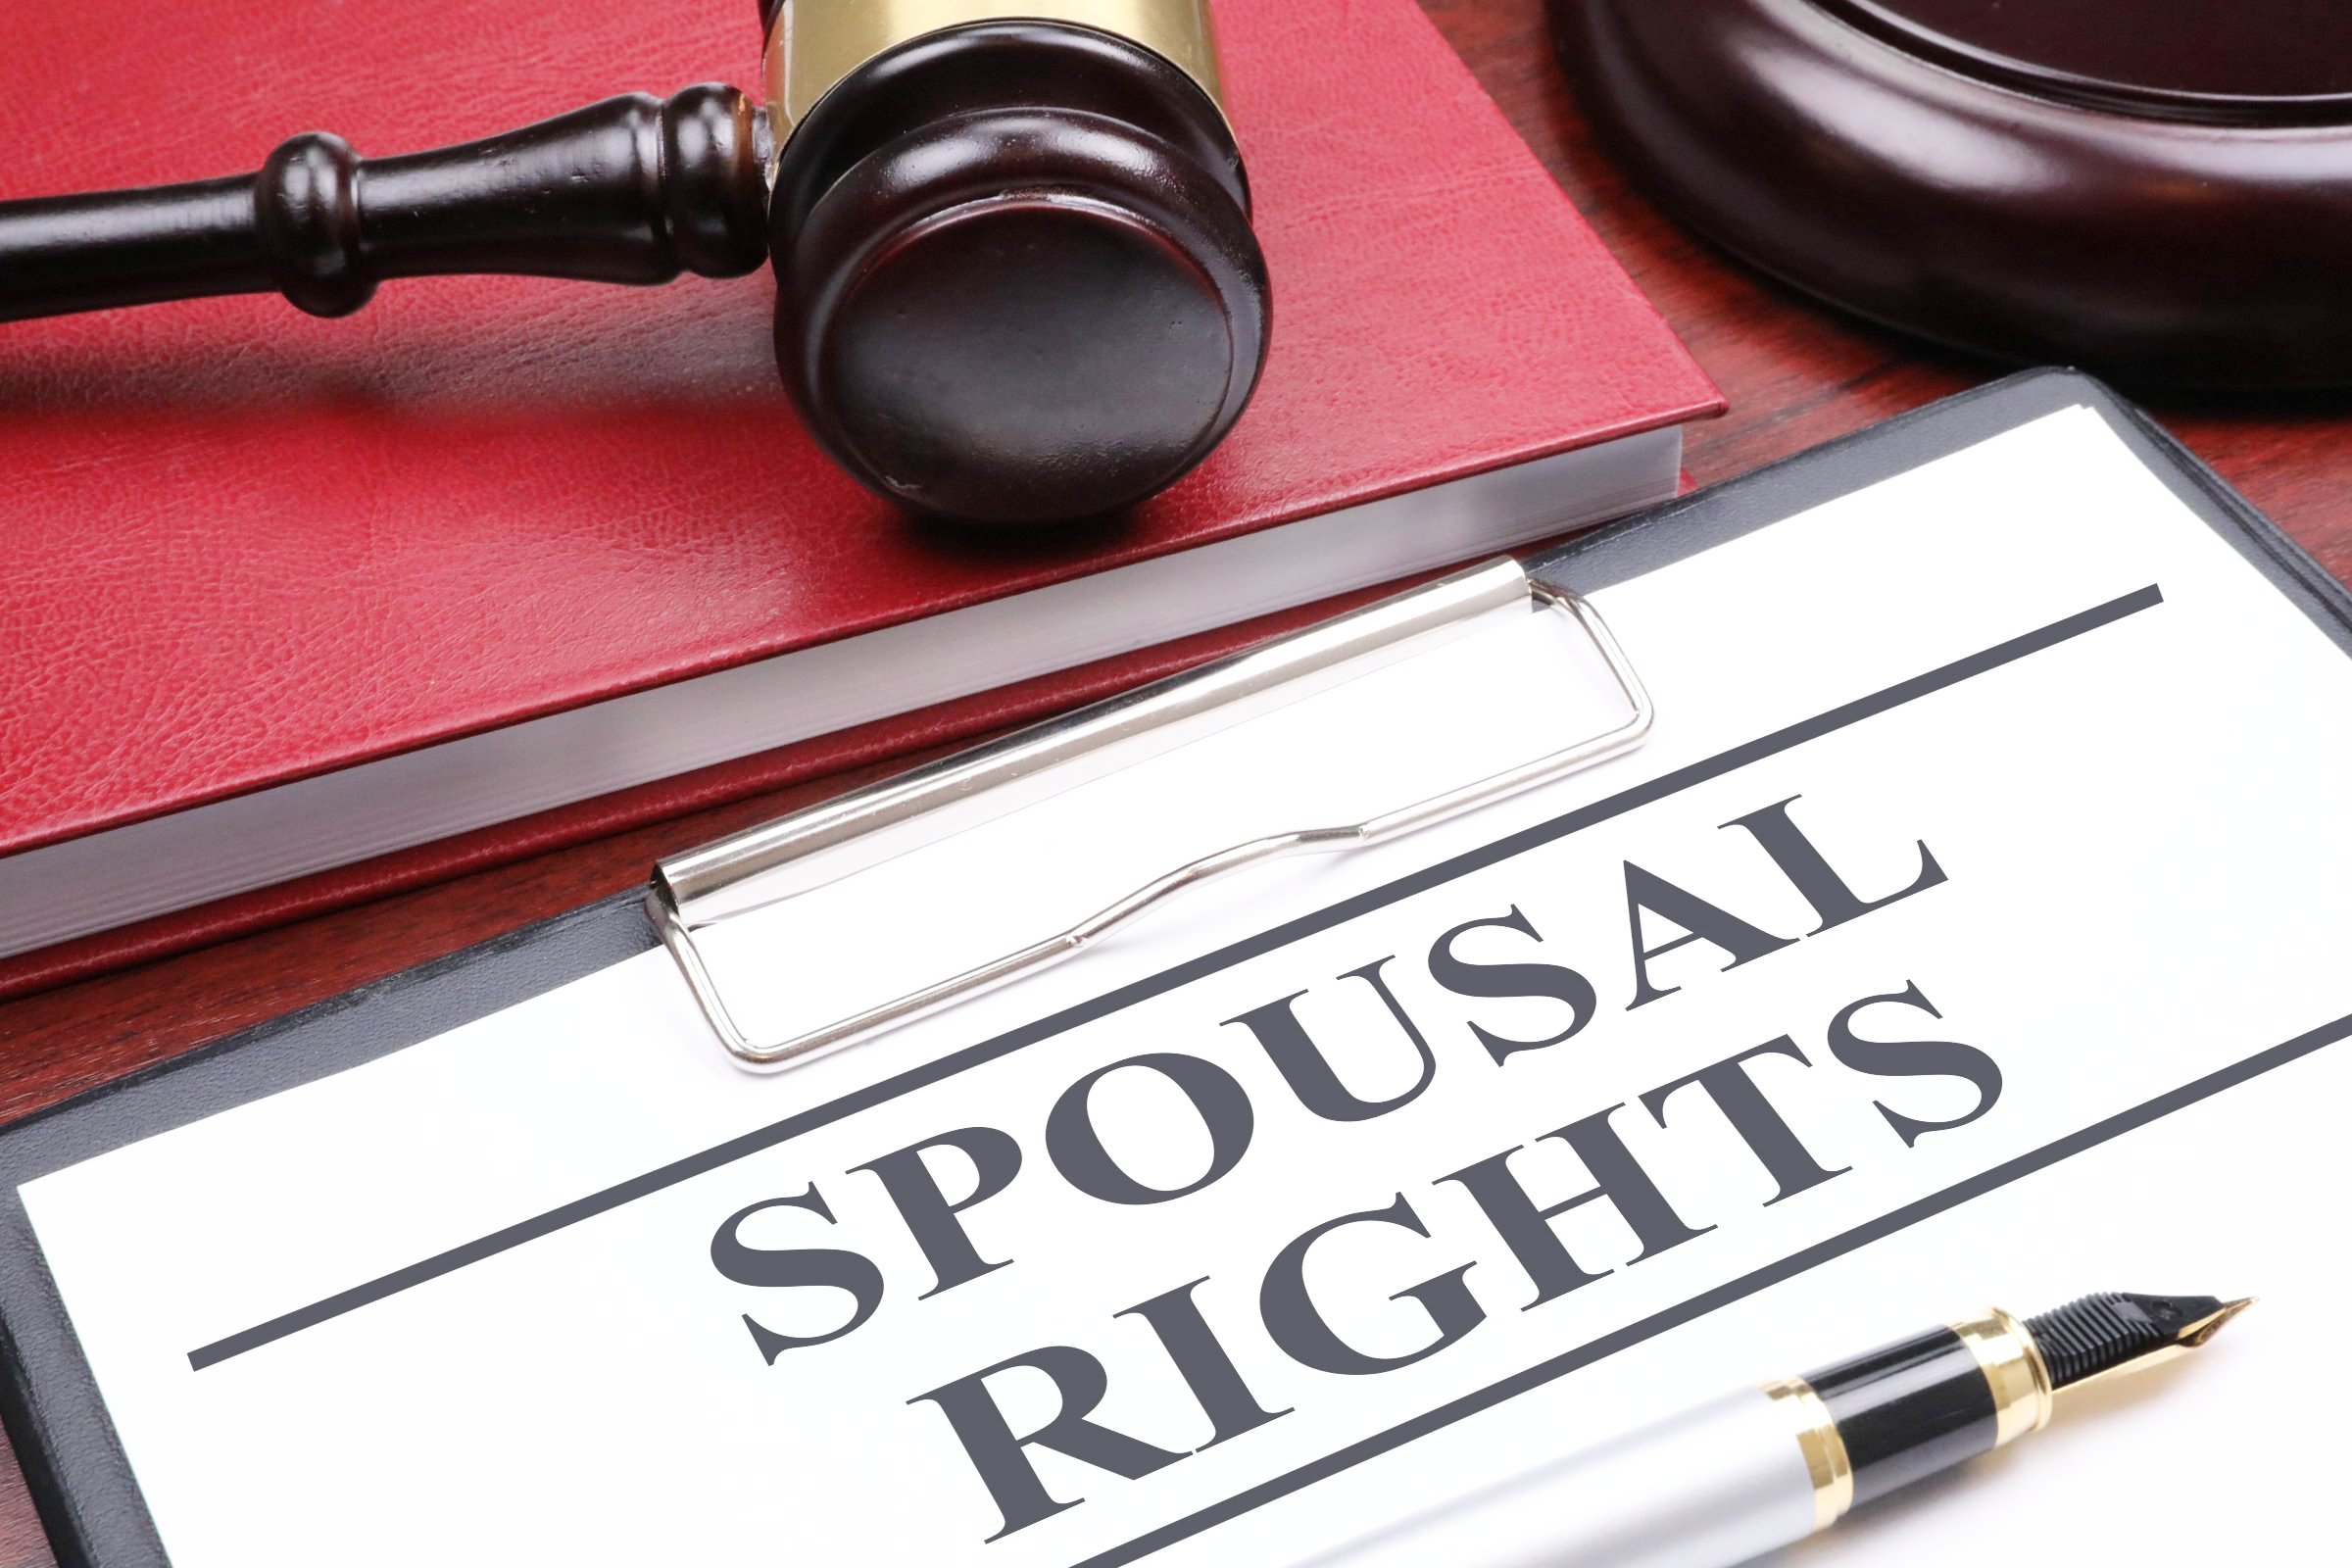 spousal rights